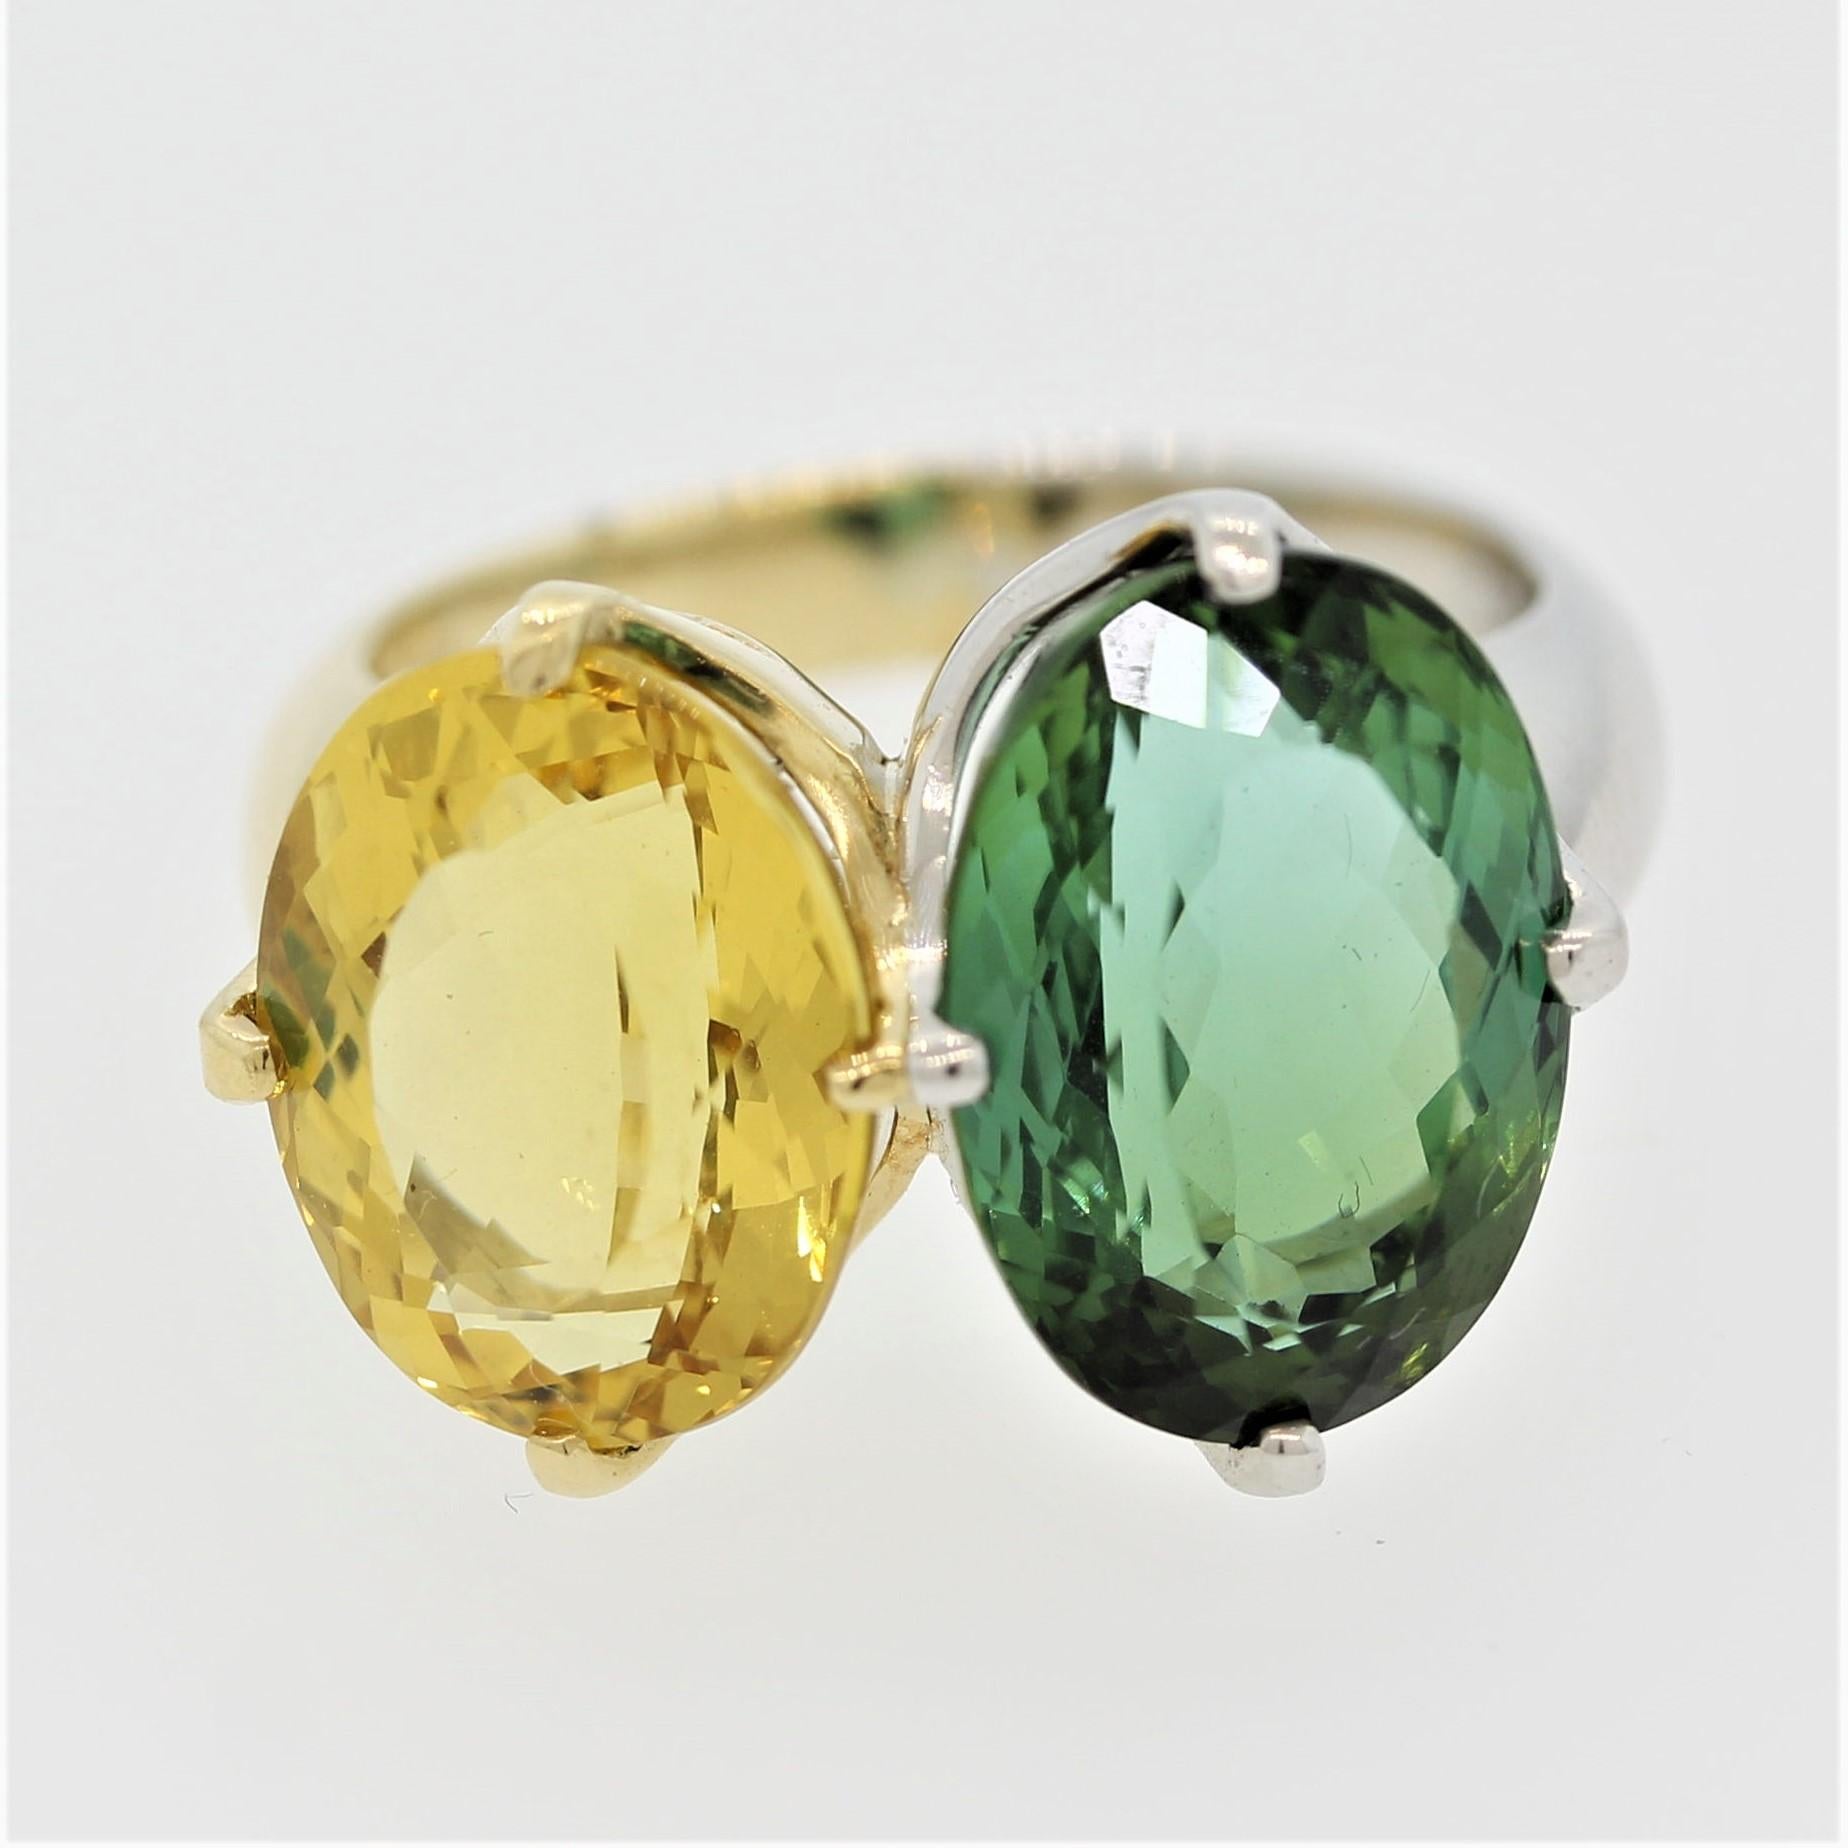 A special ring featuring two gem quality tourmalines, one green and the other yellow. Both cut as oval shapes the green tourmaline weighs 6.35 carats and is set in platinum while the yellow tourmaline weighs 4.39 carats and is set in 18k yellow